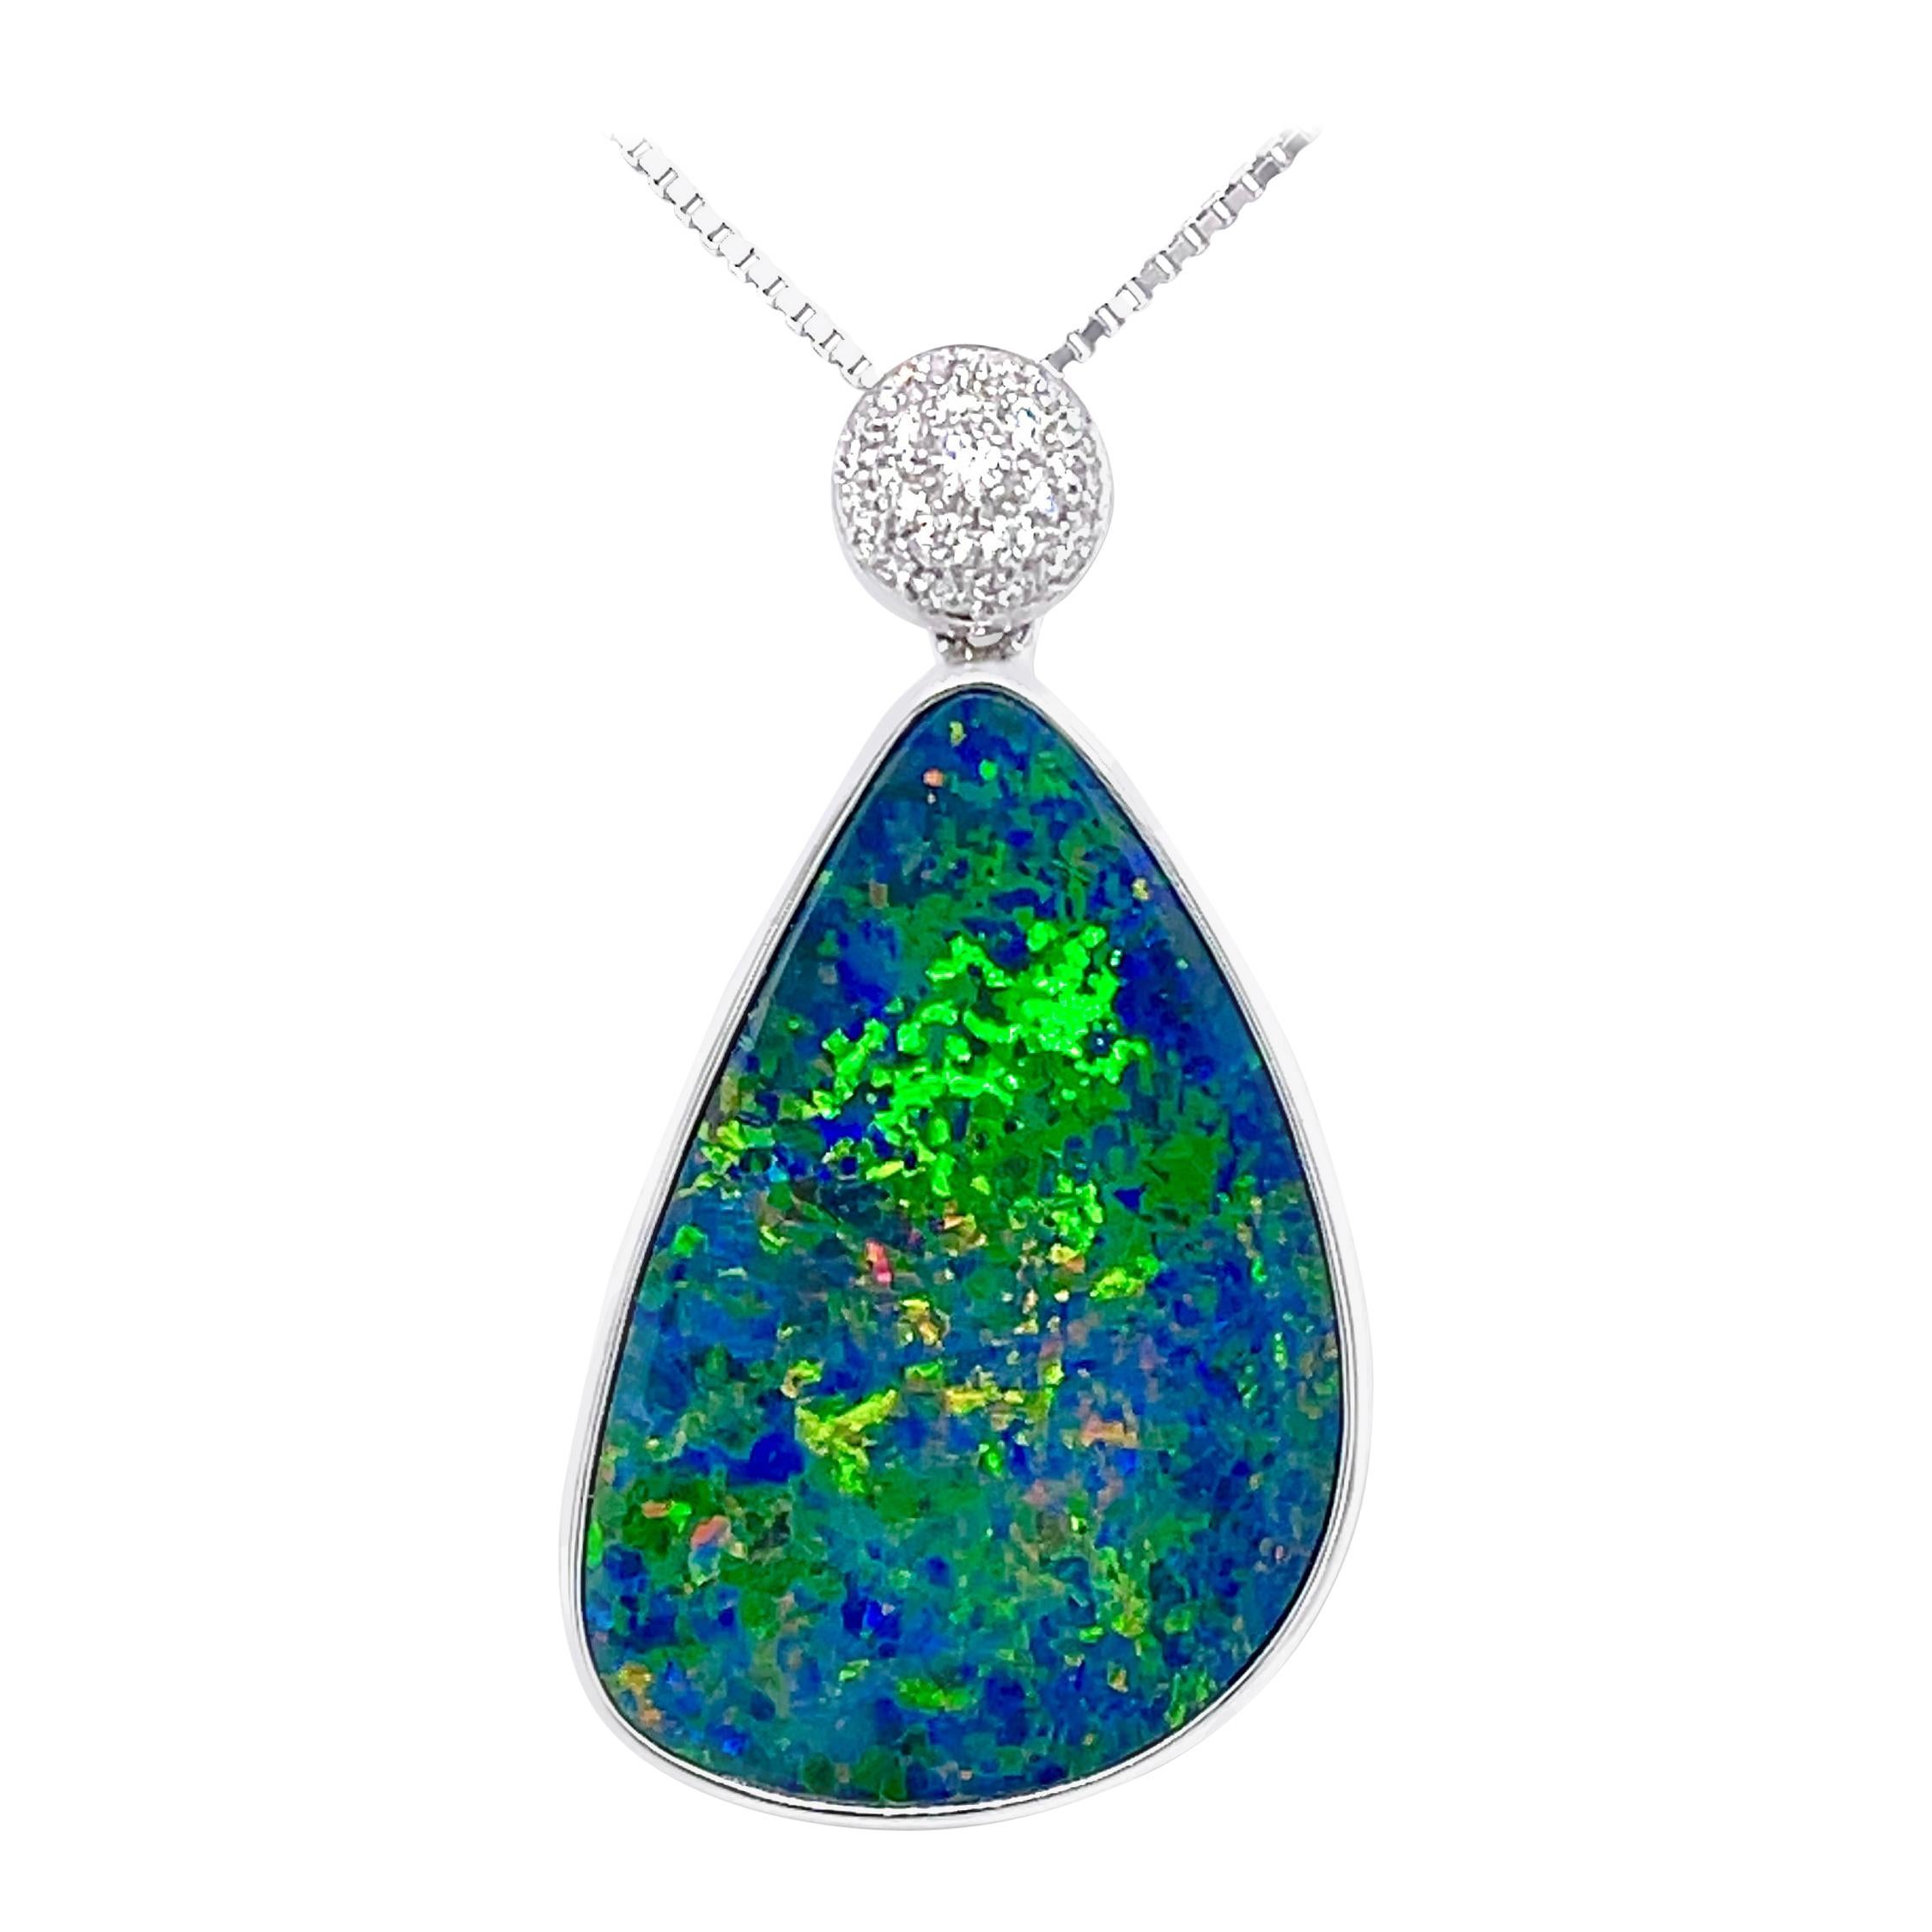 Australian Opal Doublet and Diamond Pendant Necklace in 18K White Gold